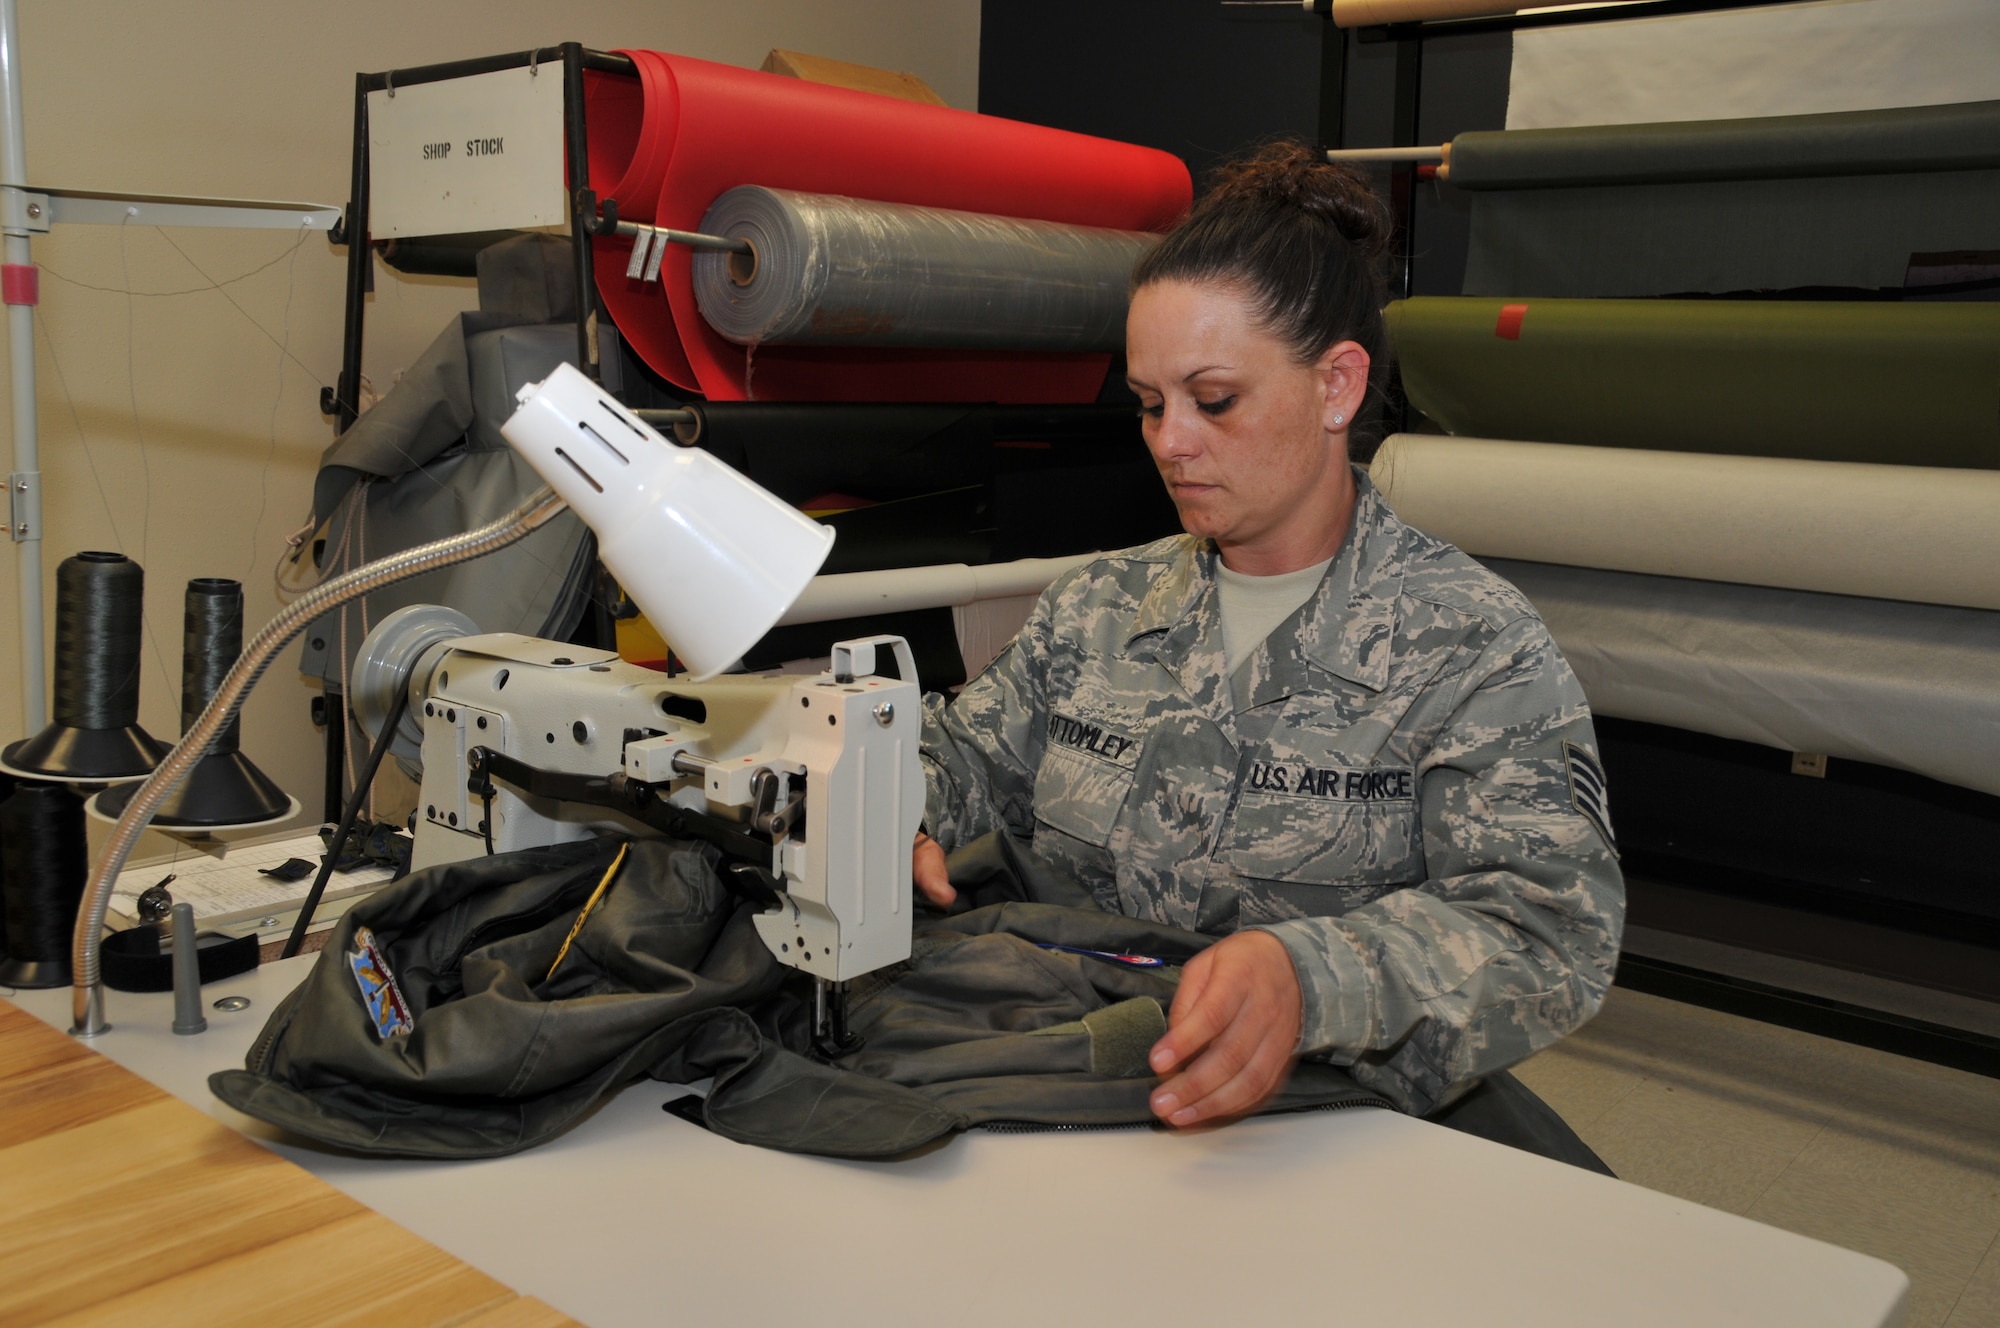 120th Fighter Wing Staff Sgt. Naomy Bottomley works on a piece of flight clothing in the Aircrew Flight Equipment section on June 23, 2011. 
(U.S. Air Force photo by Senior Master Sgt. Eric Peterson.)